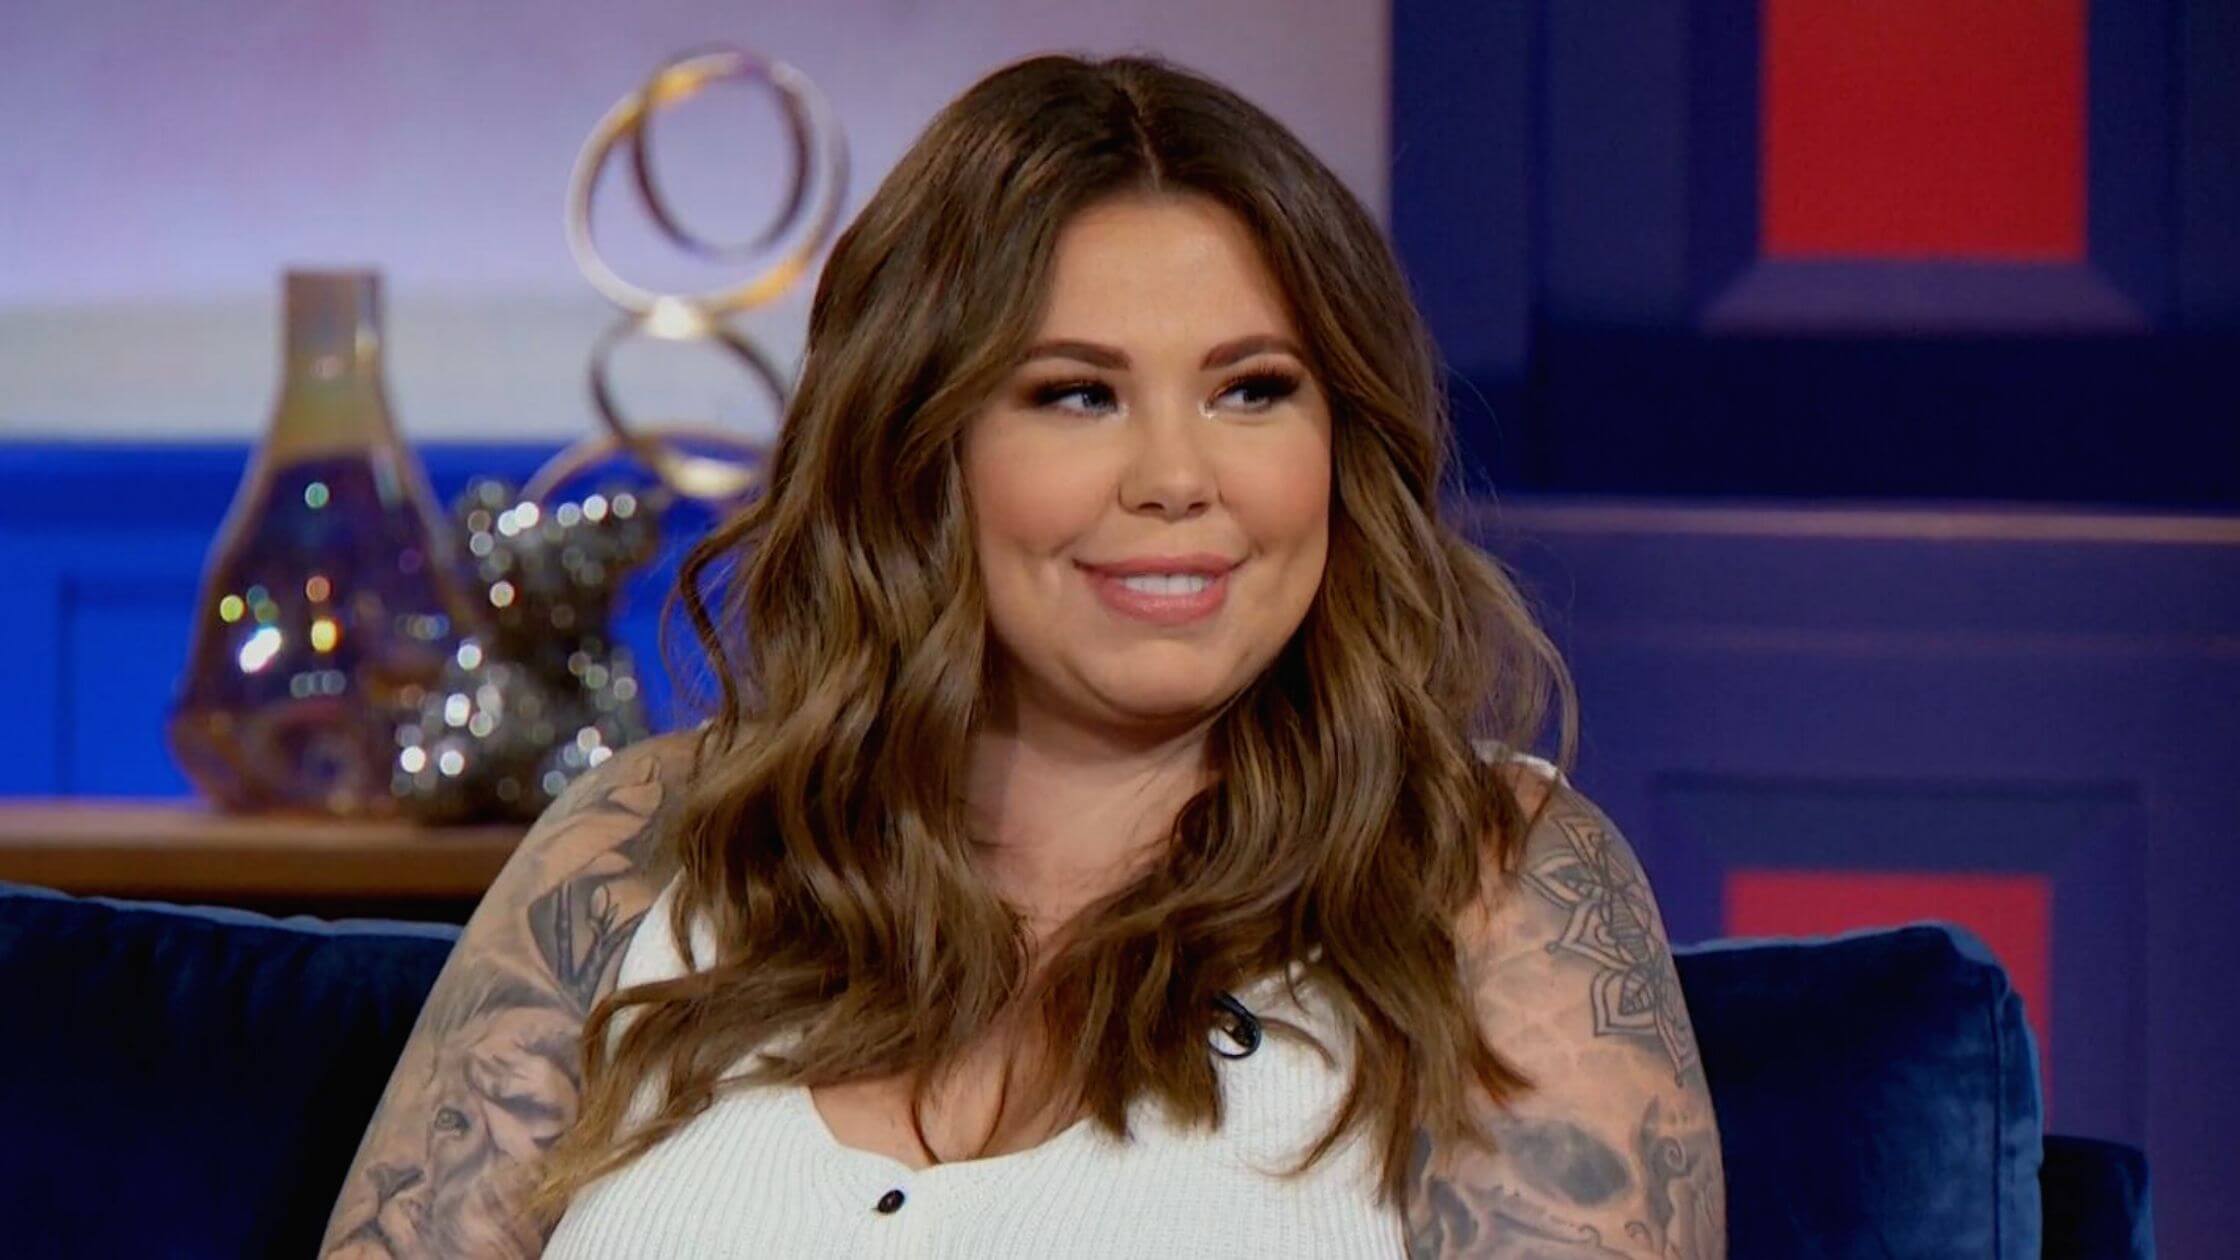 Kailyn-Lowry-Announces-Shes-Leaving-Teen-Mom-2